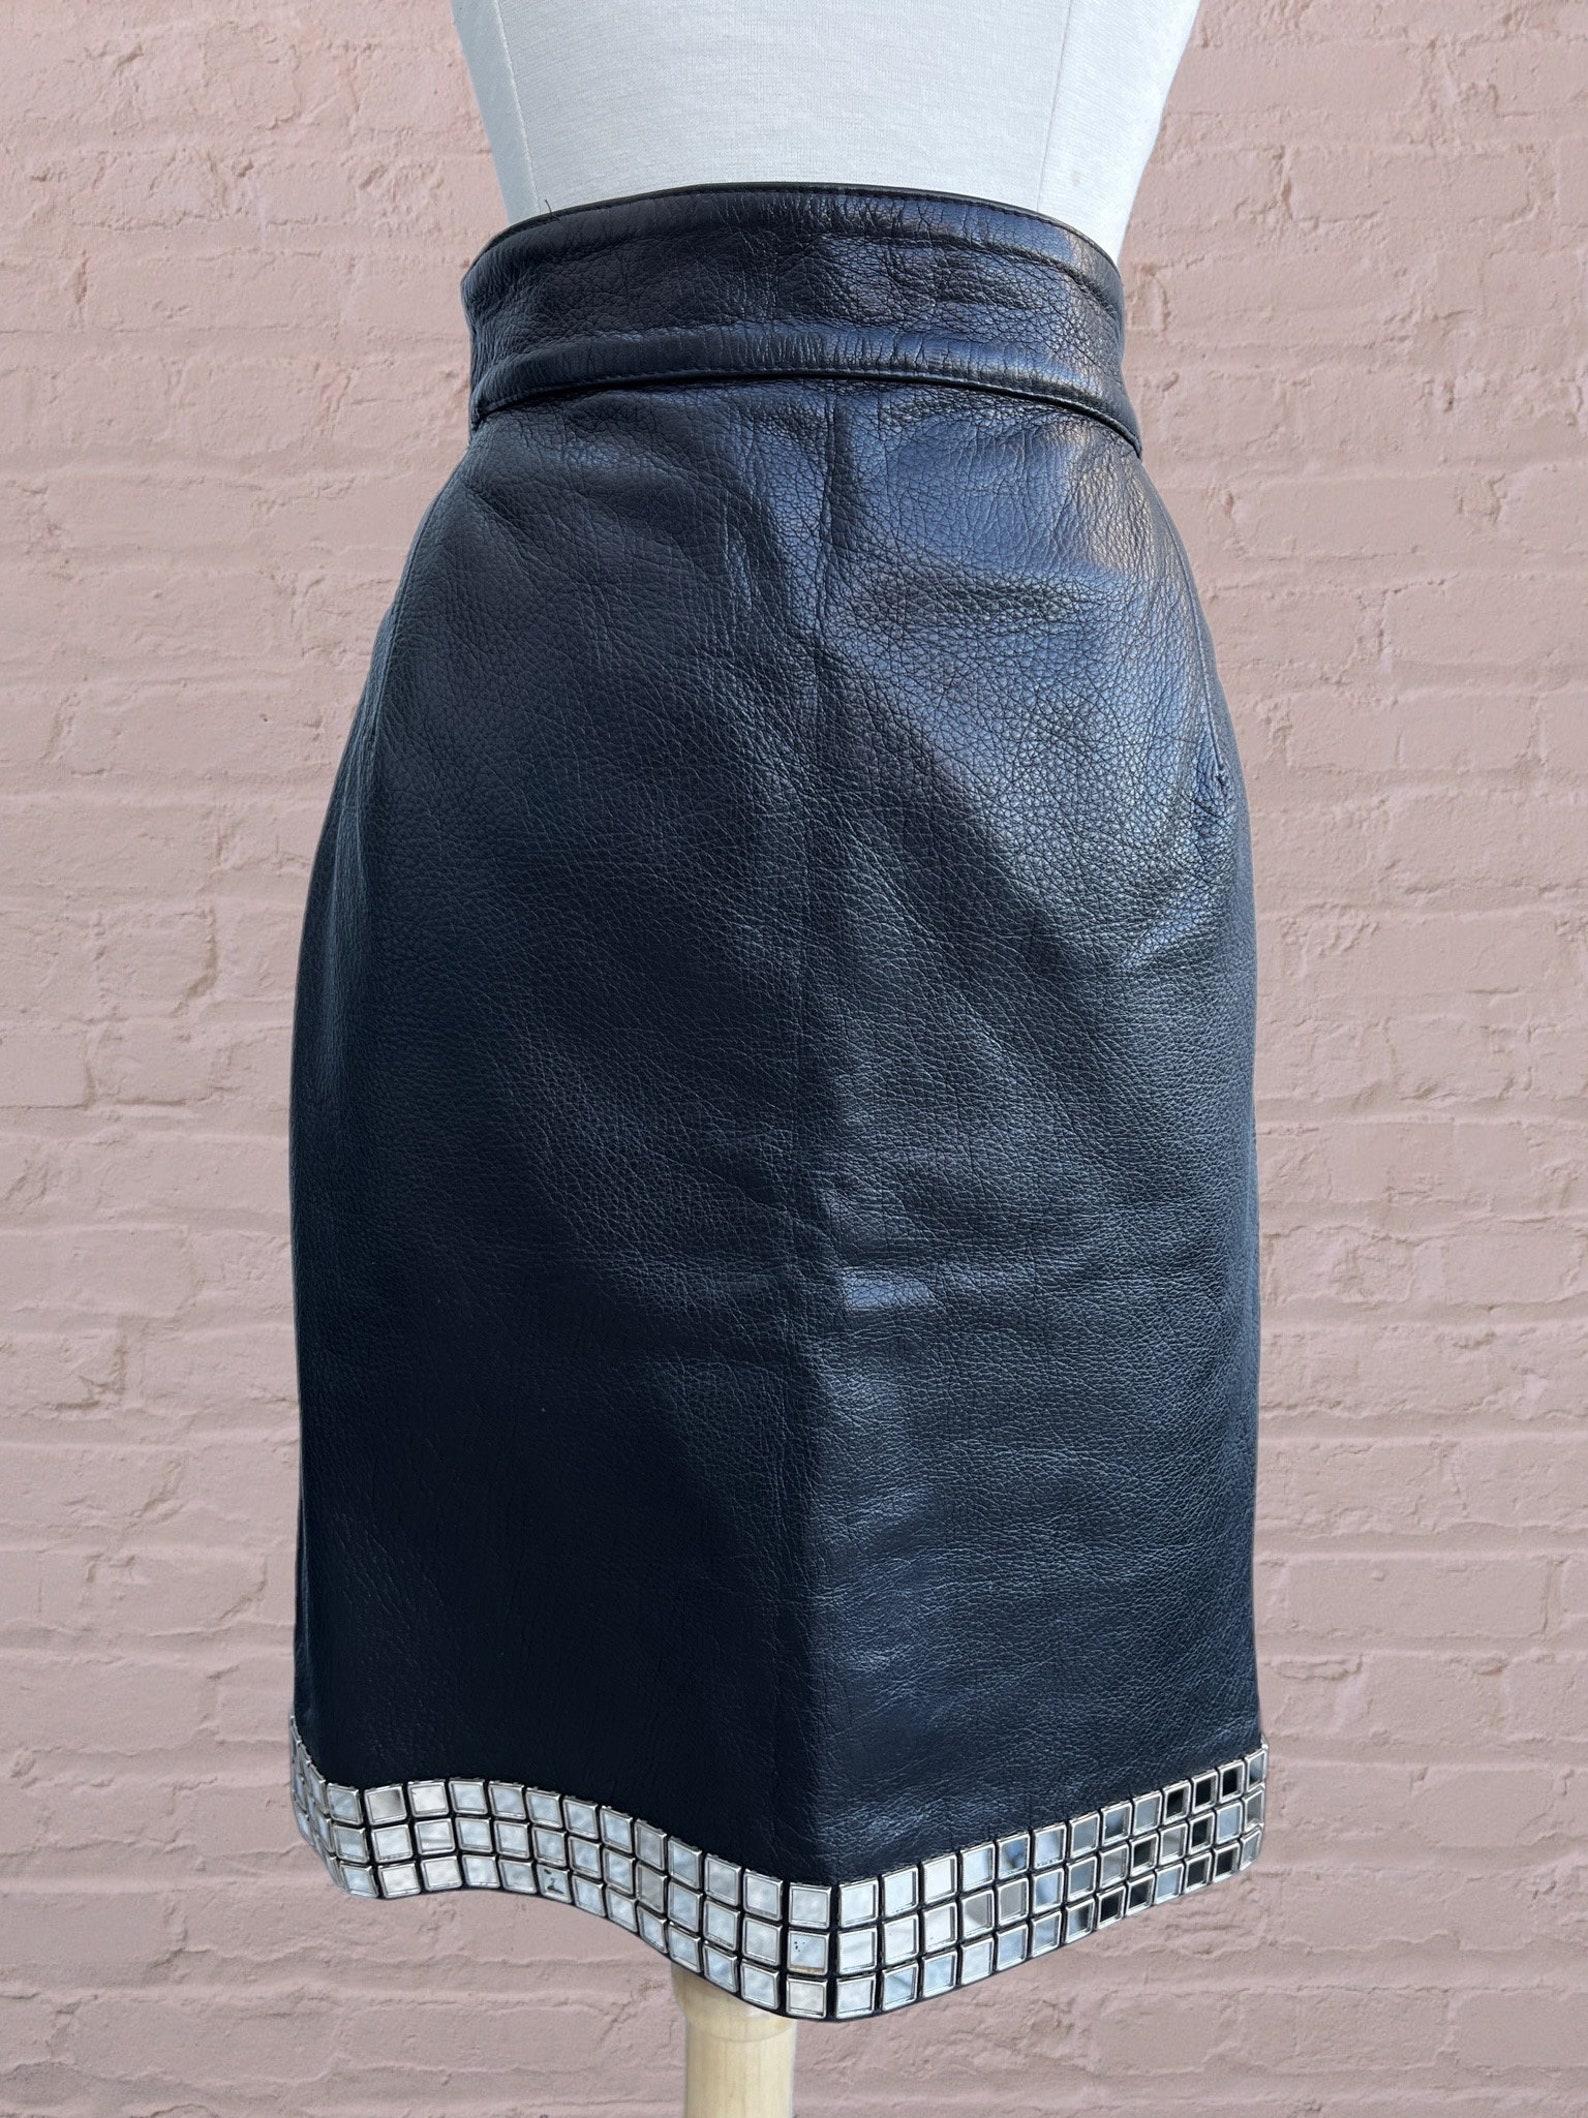 Moschino Black Leather Mirror Skirt, Circa 1990 For Sale 3